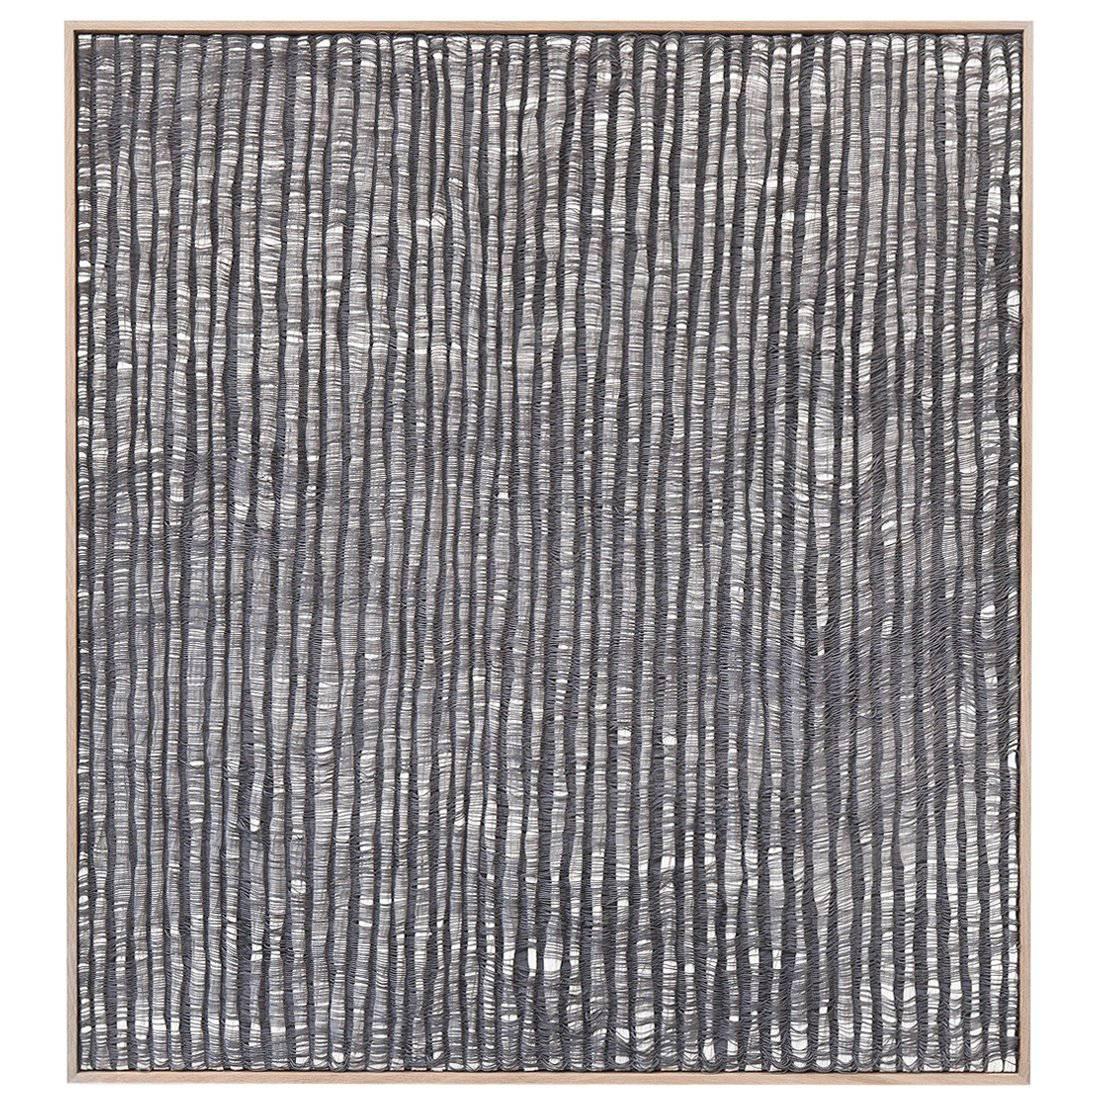 Contemporary Weaving Textile Fiber Art, Gray Waves by Mimi Jung For Sale